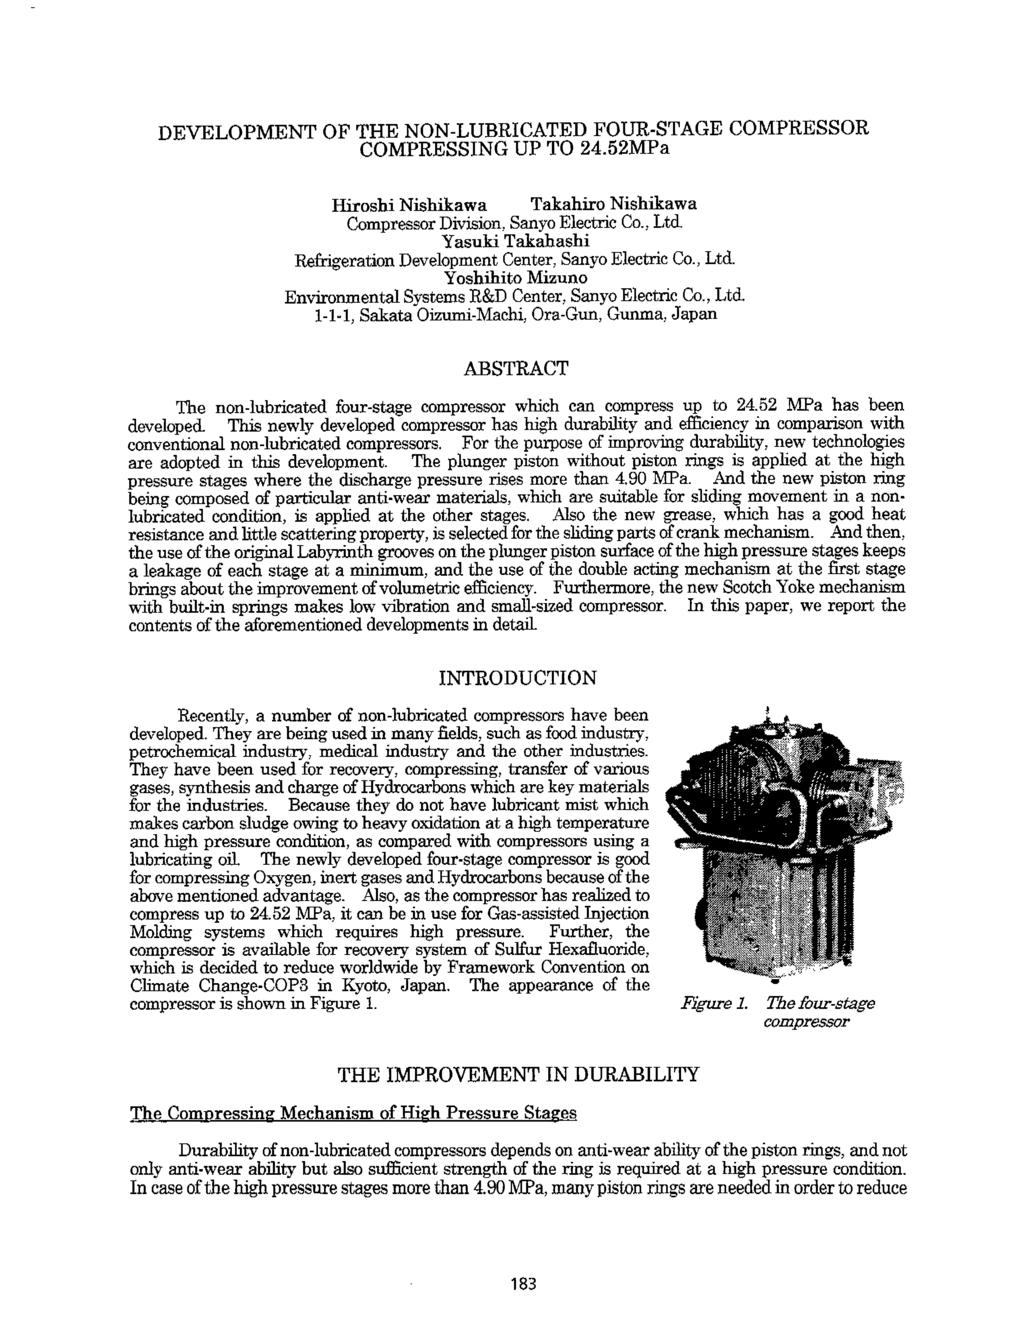 DEVELOPMENT OF THE NON-LUBRICATED FOUR-STAGE COMPRESSOR COMPRESSING UP TO 24.